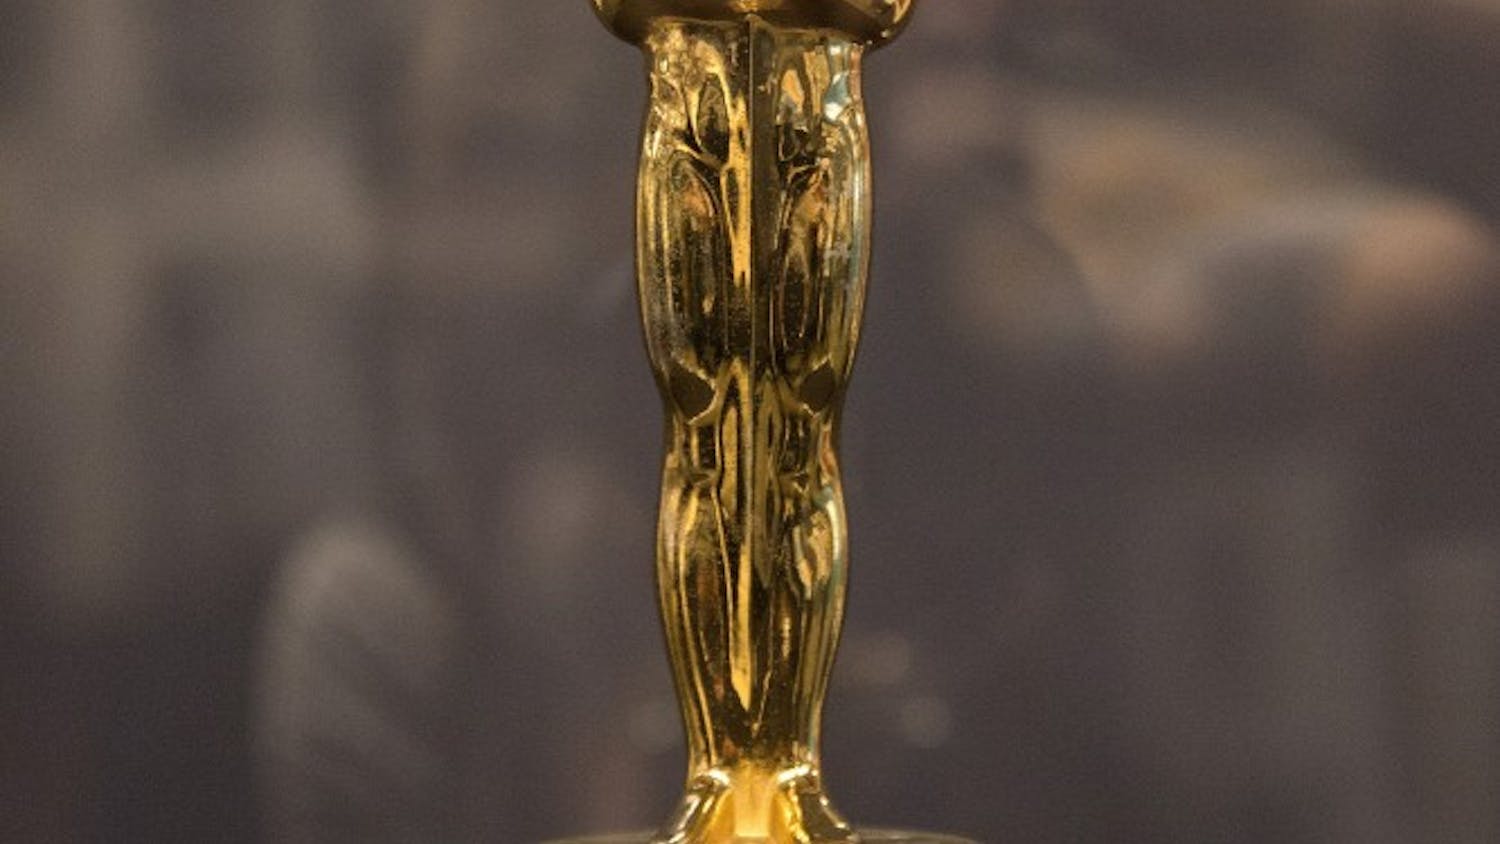 An Academy Award given to Charles Brackett, Billy Wilder and D.M. Marshman Jr. for "Best Writing, Story and Screenplay" for "Sunset Boulevard" is on display at the  "Light & Noir: Exiles and Emigres in Hollywood, 1933-1950" exhibit at the Illinois Holocaust Museum Tuesday, Oct. 6, 2015 in Skokie, Ill. (Erin Hooley/Chicago Tribune/TNS) 